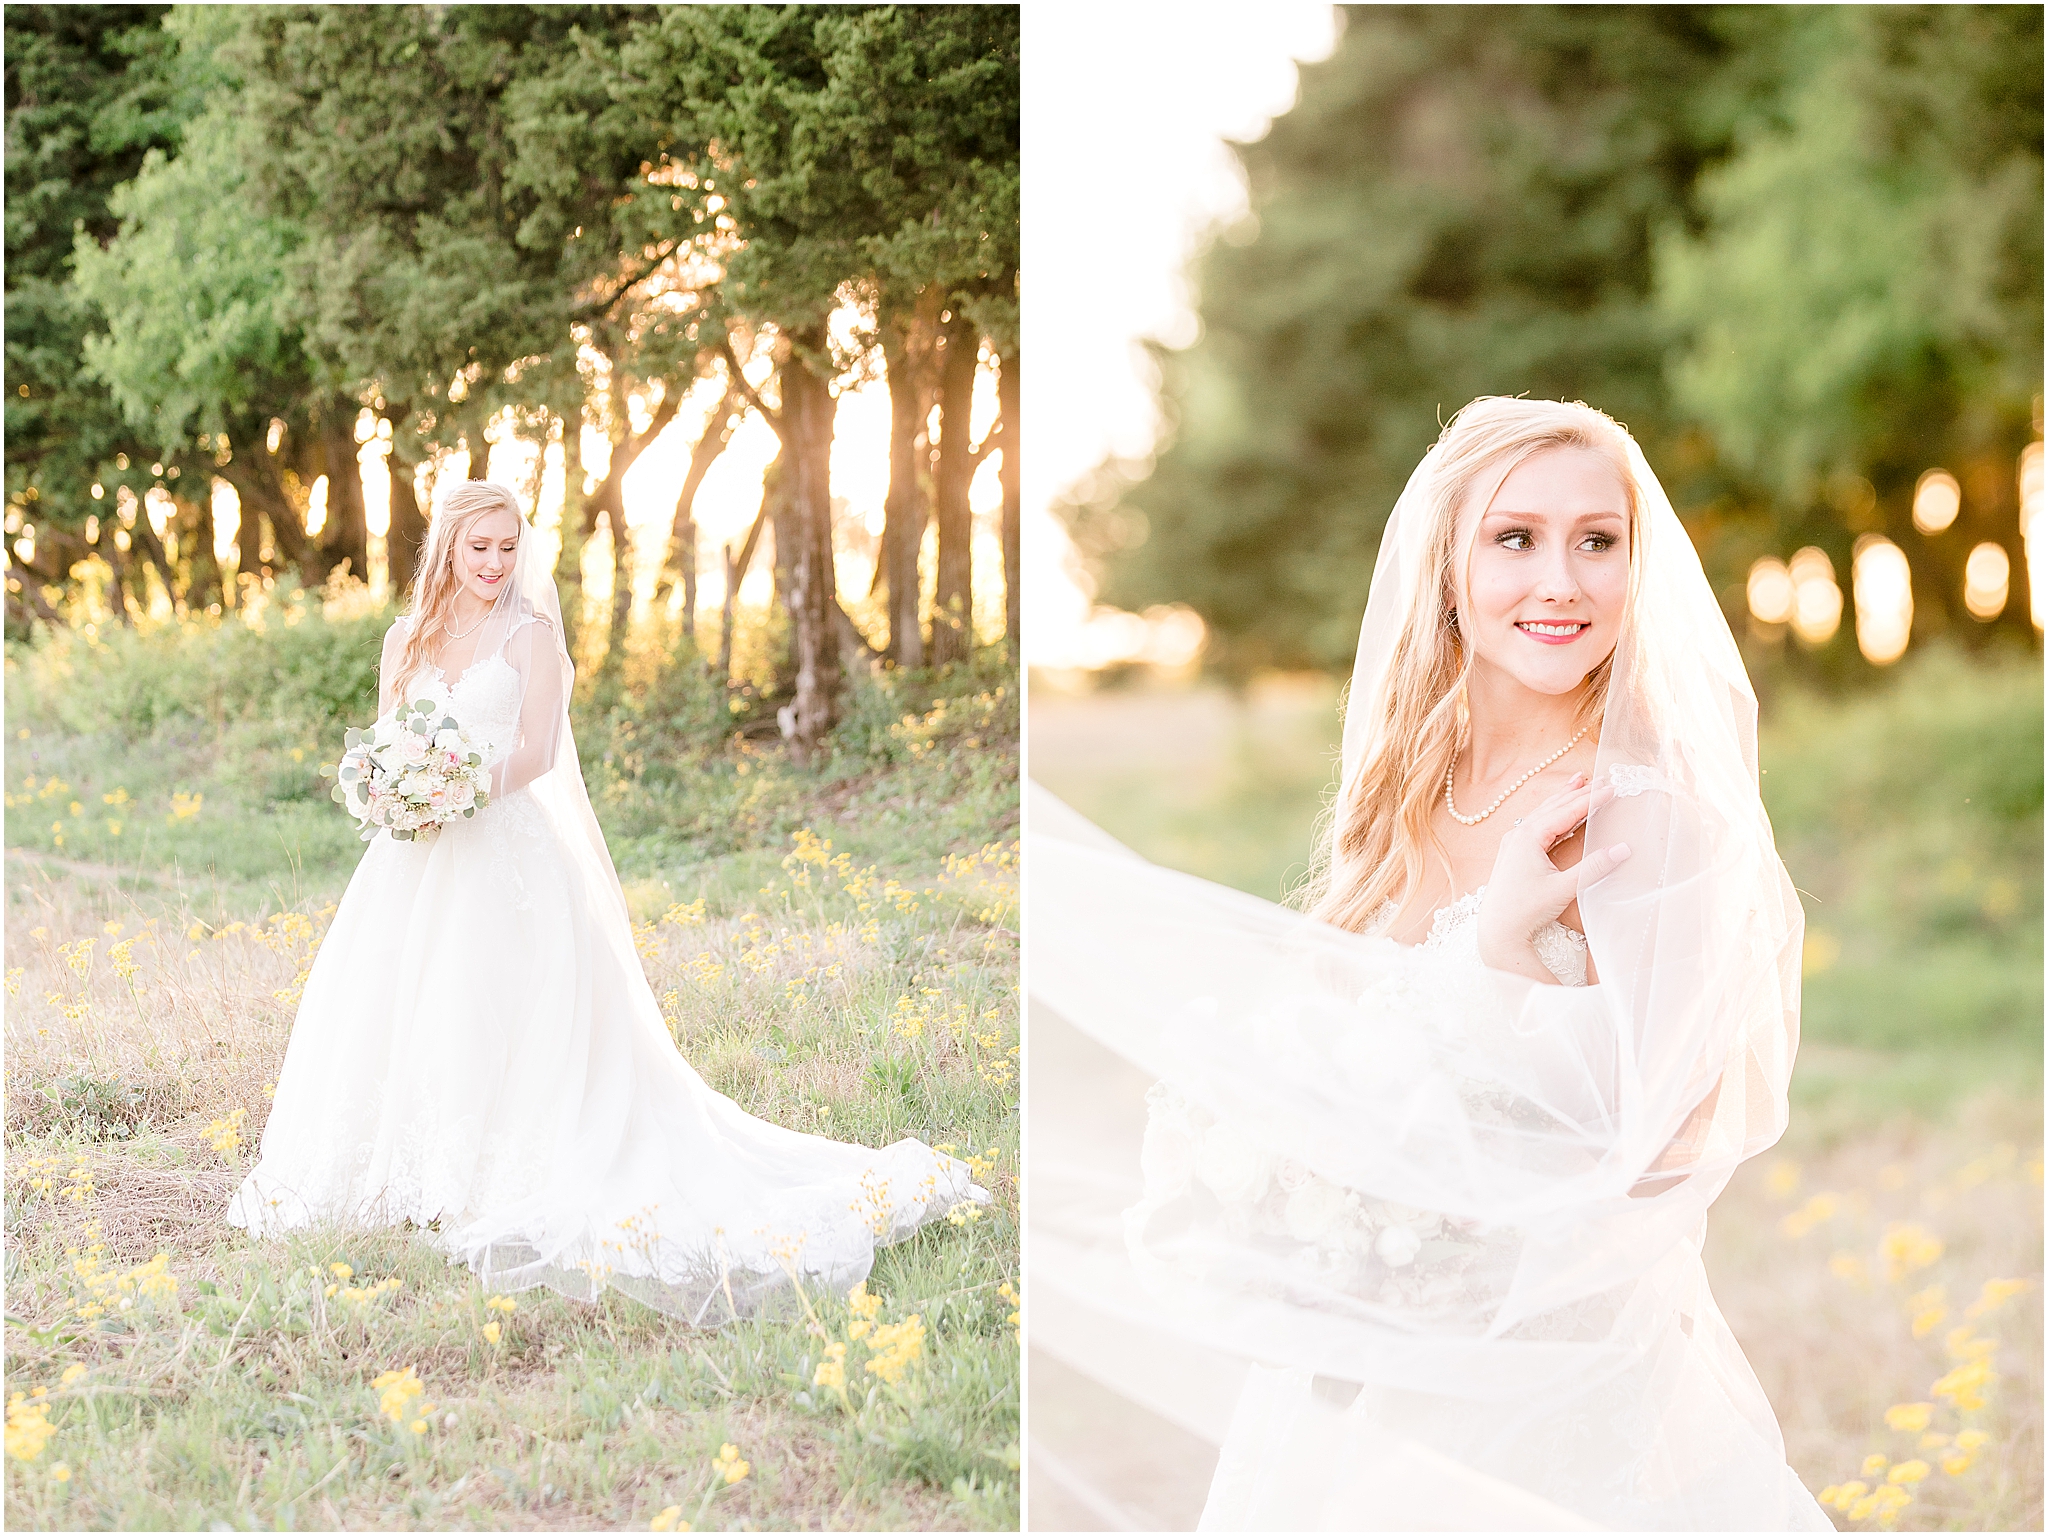 Outdoor Spring Bridal Session by DFW Wedding PHotographer Jillian Hogan based out of McKinney, Texas